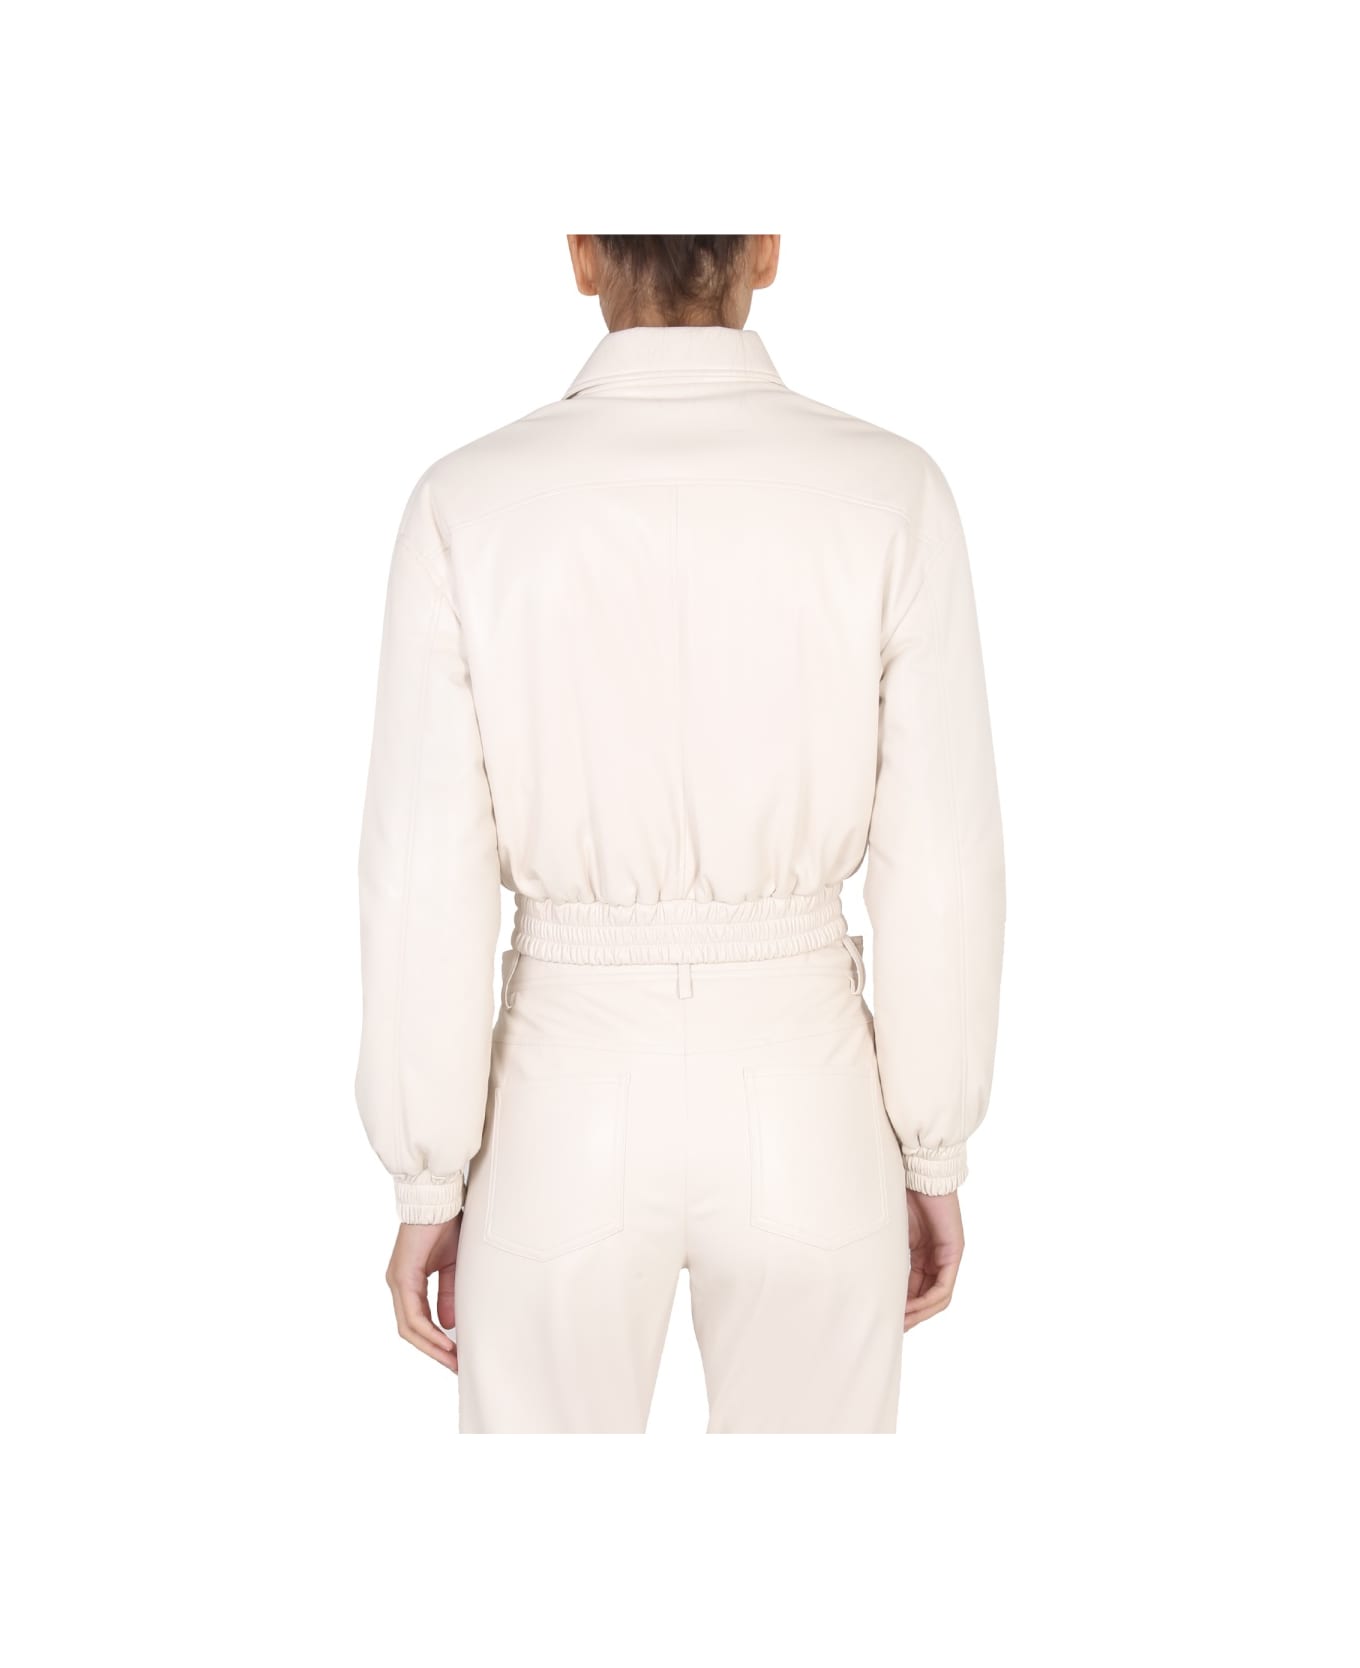 MSGM Jacket With Classic Collar - IVORY